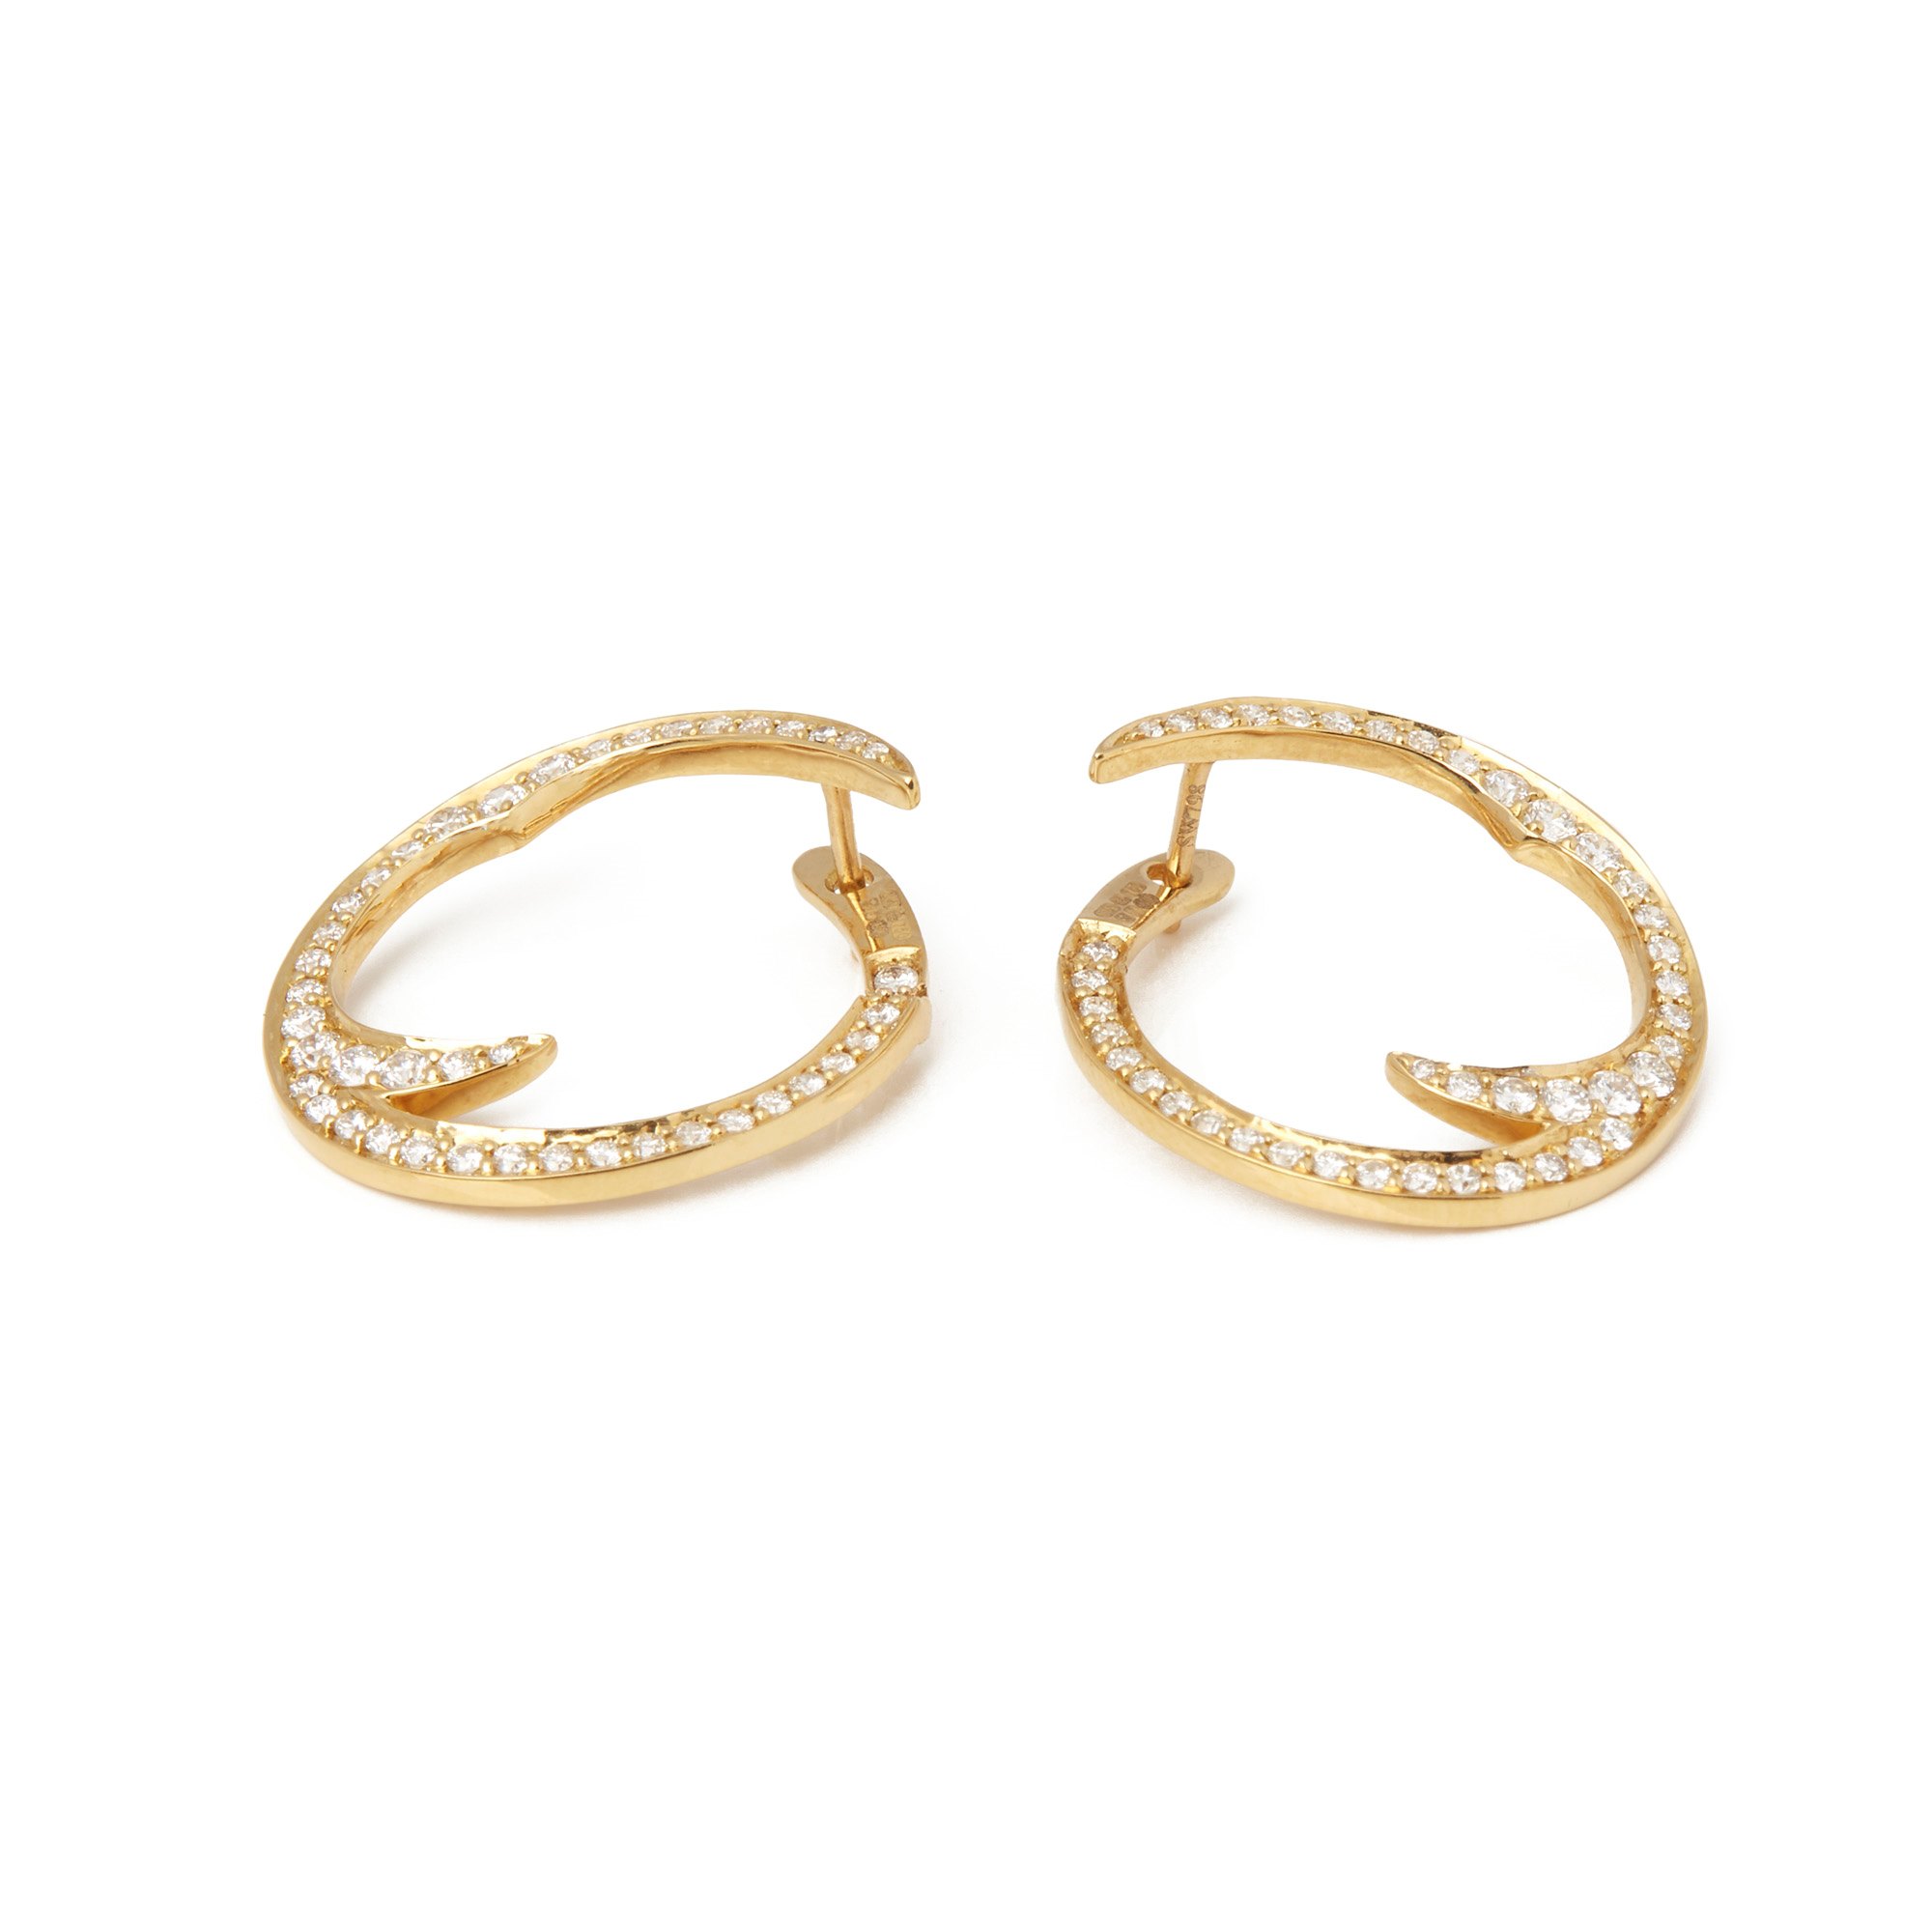 Stephen Webster Thorn 18ct Yellow Gold Pave Diamond Earrings